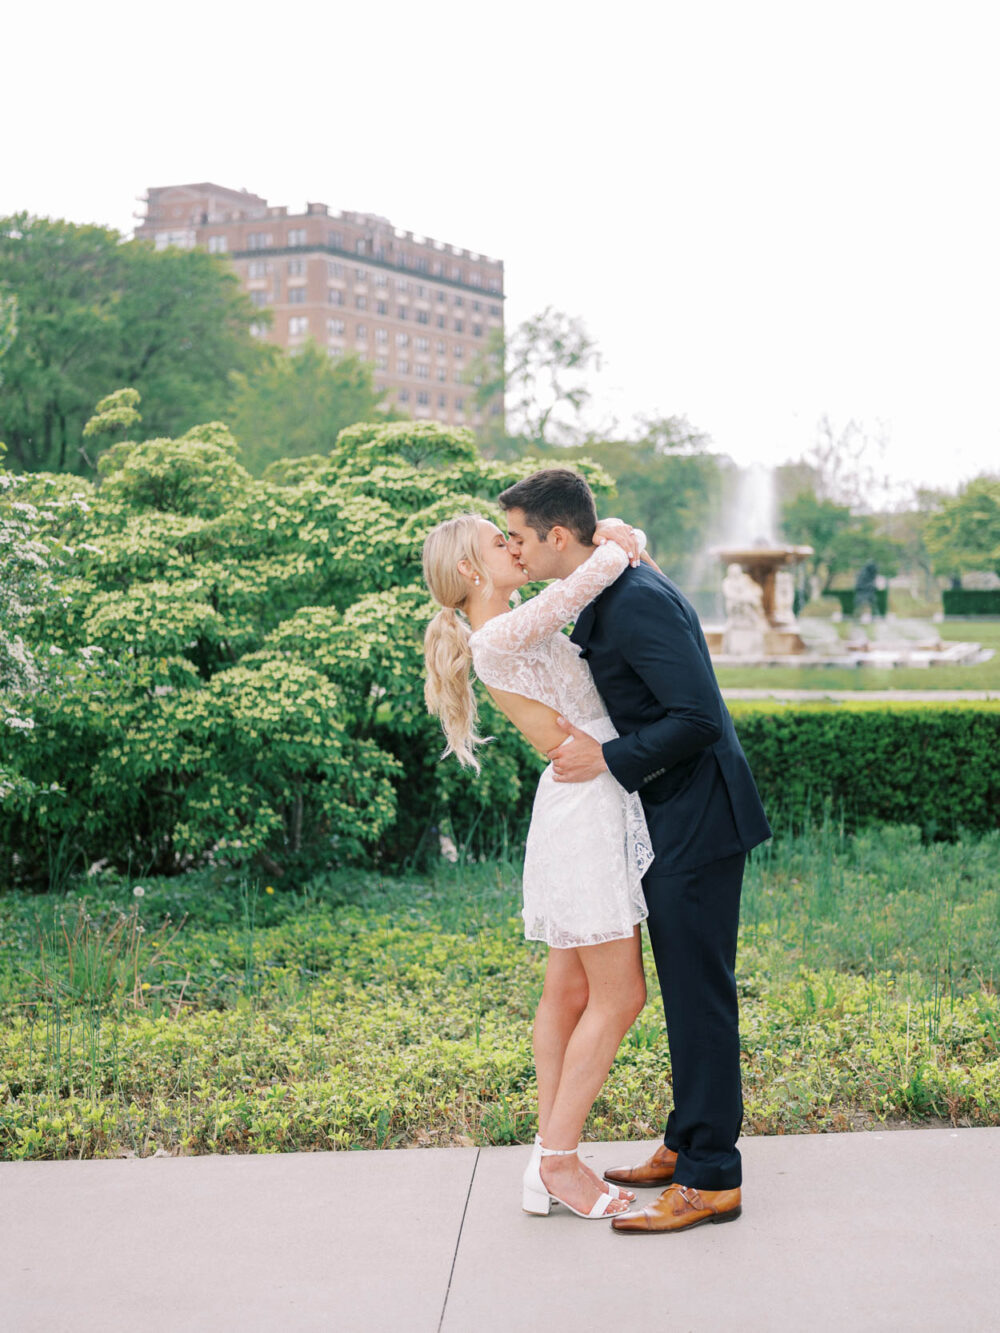 Cleveland engagement photos by Juliana Kae at the Cleveland Art Museum